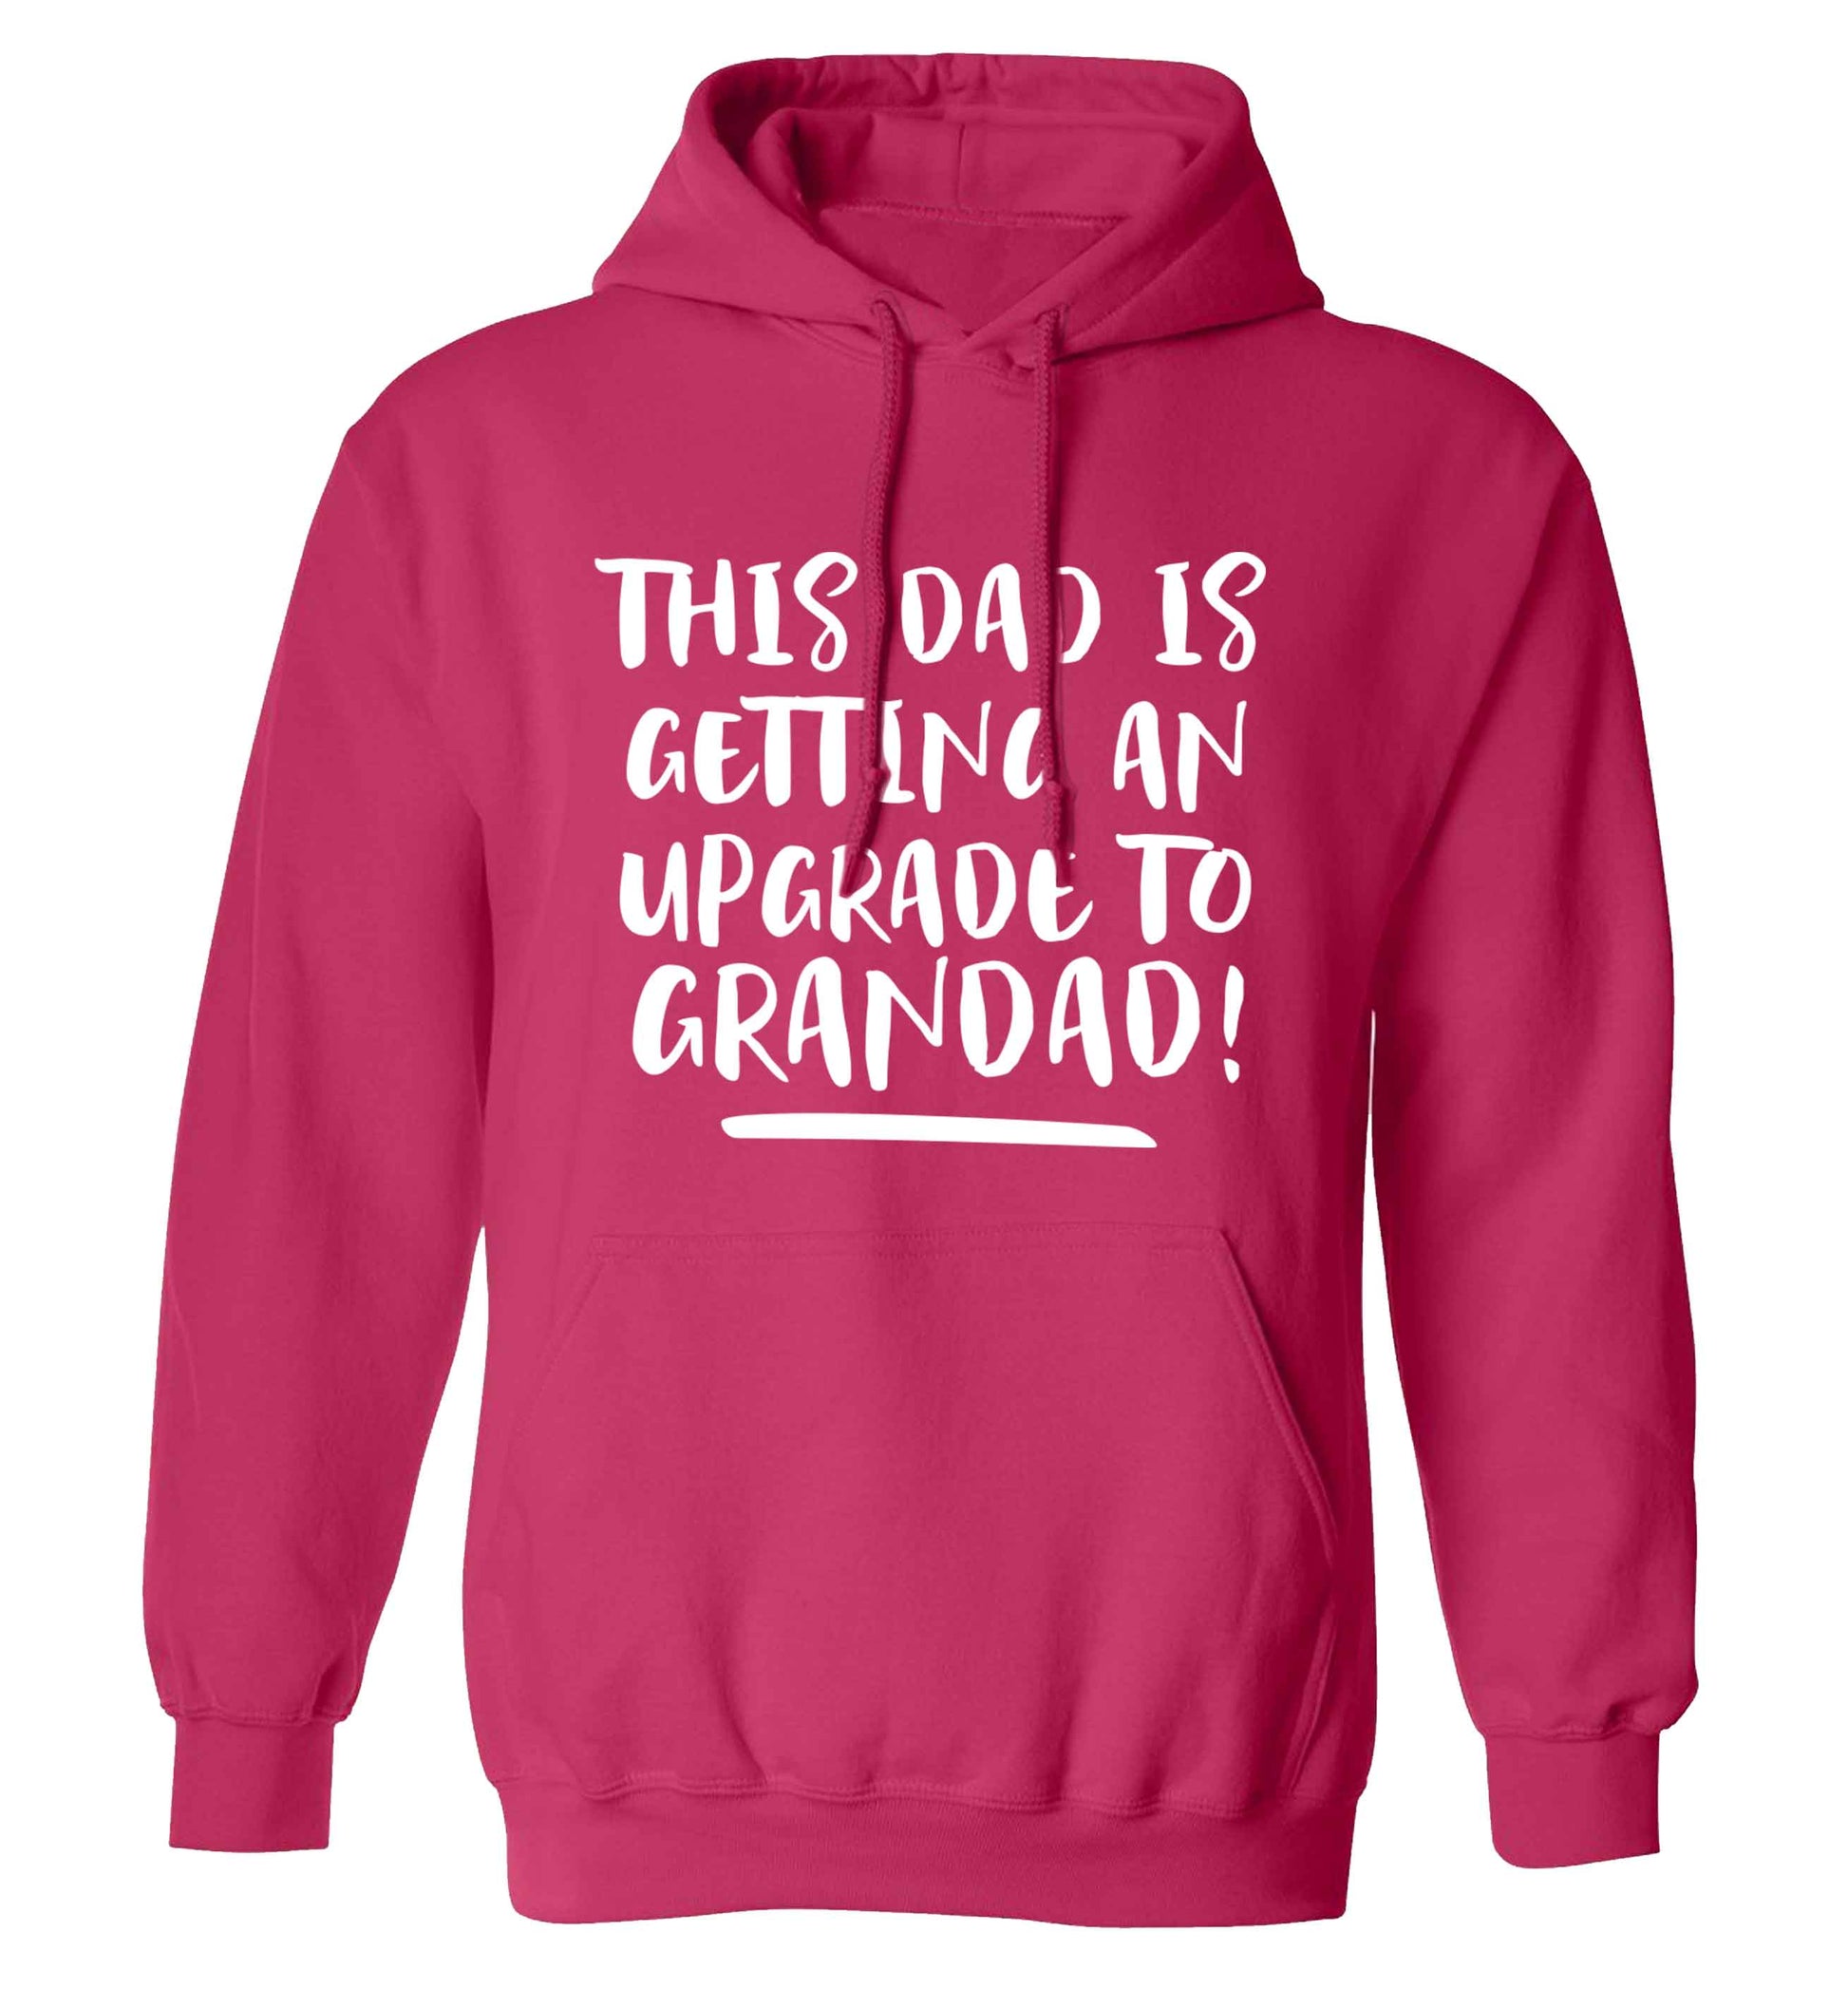 This dad is getting an upgrade to grandad! adults unisex pink hoodie 2XL